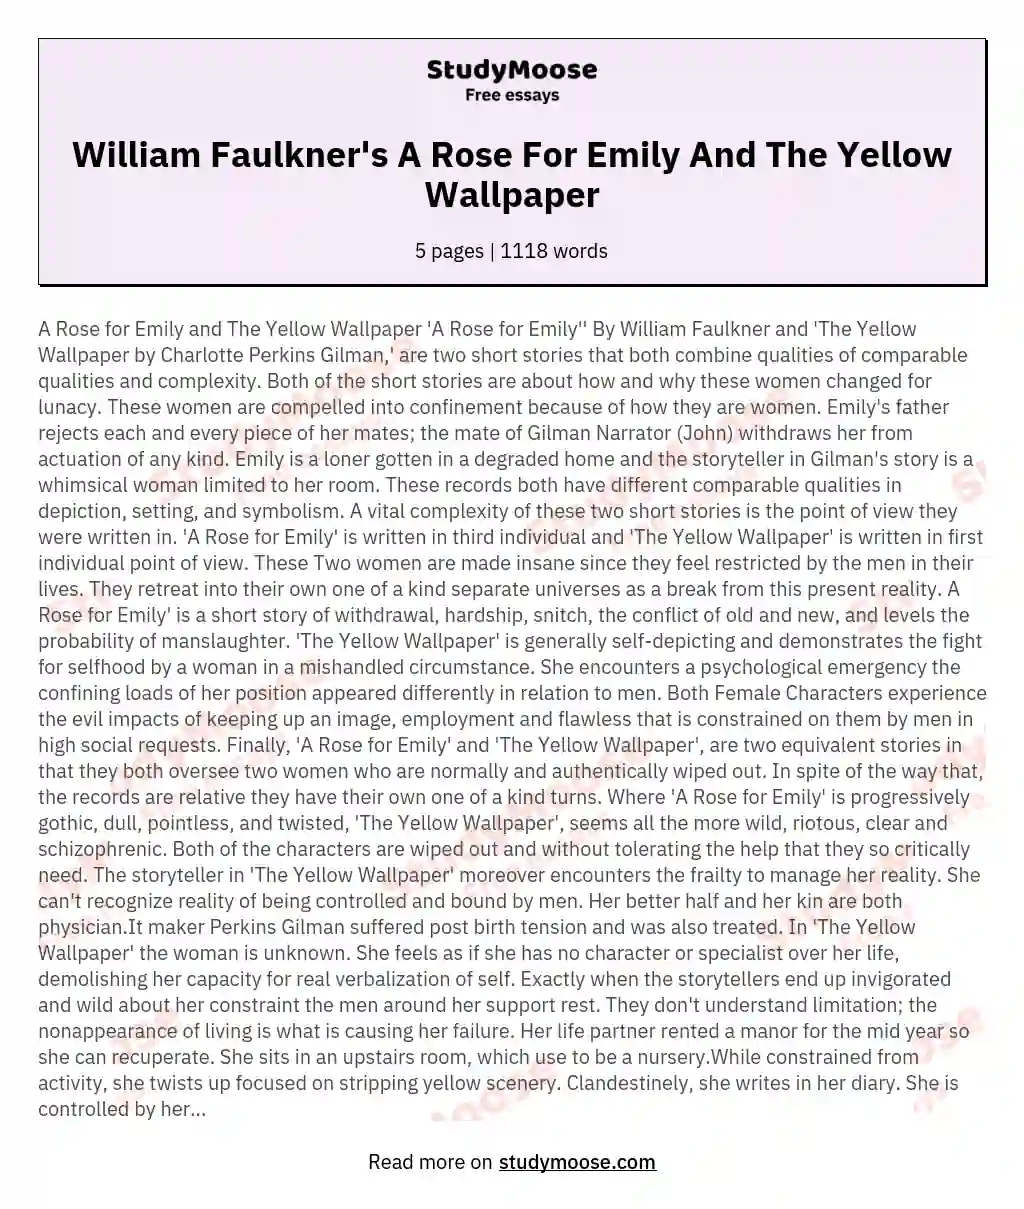 William Faulkner's A Rose For Emily And The Yellow Wallpaper essay